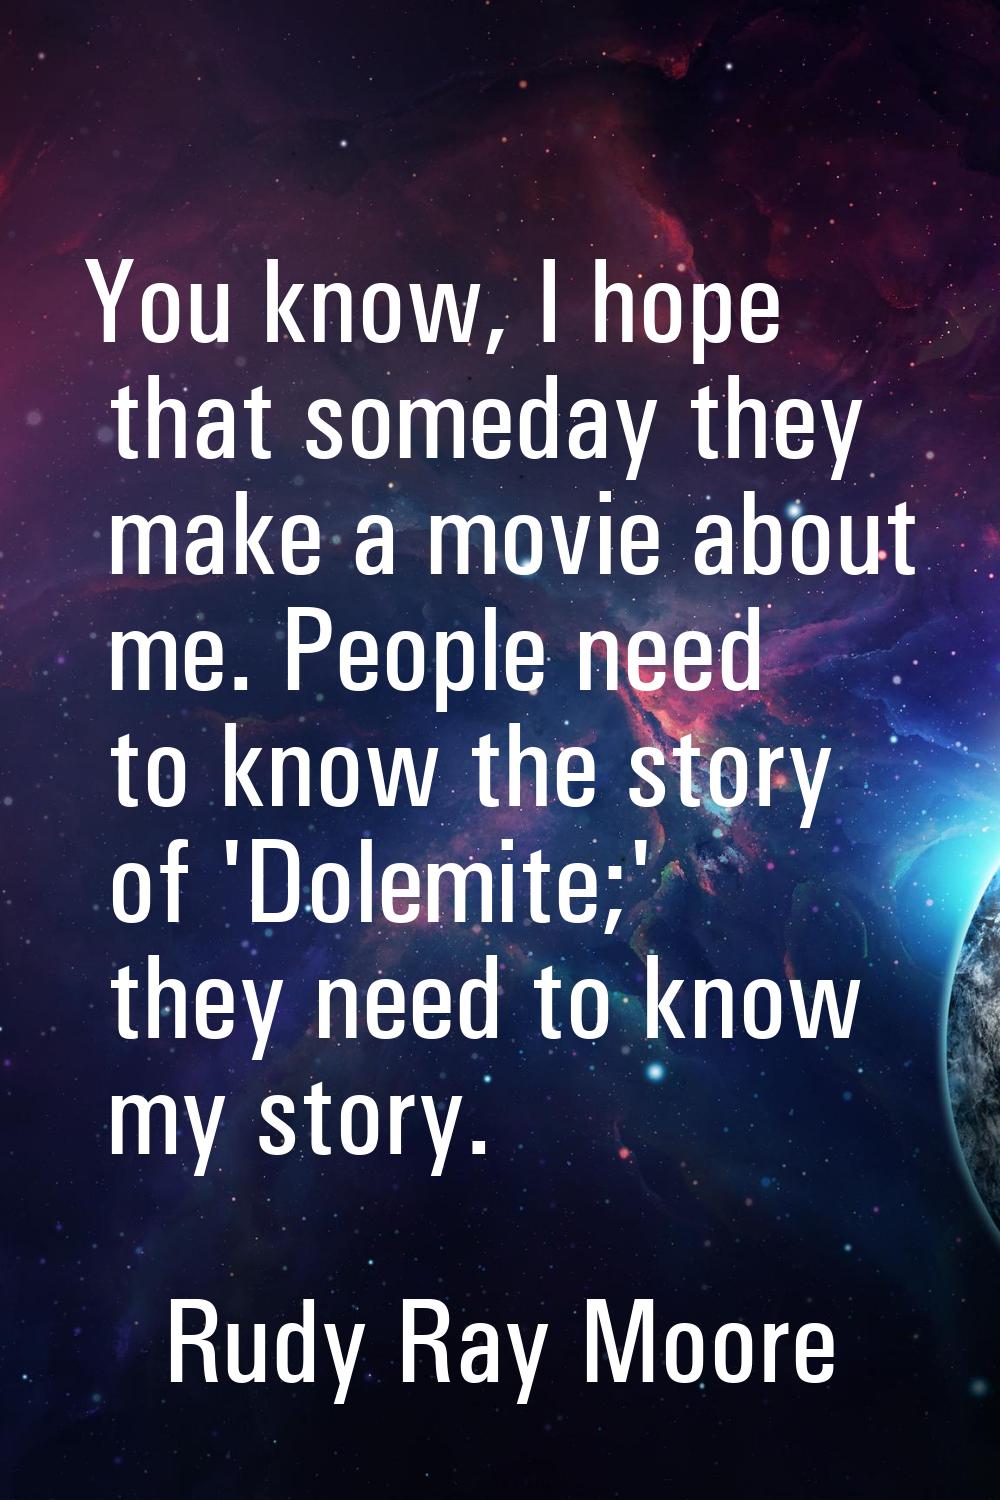 You know, I hope that someday they make a movie about me. People need to know the story of 'Dolemit